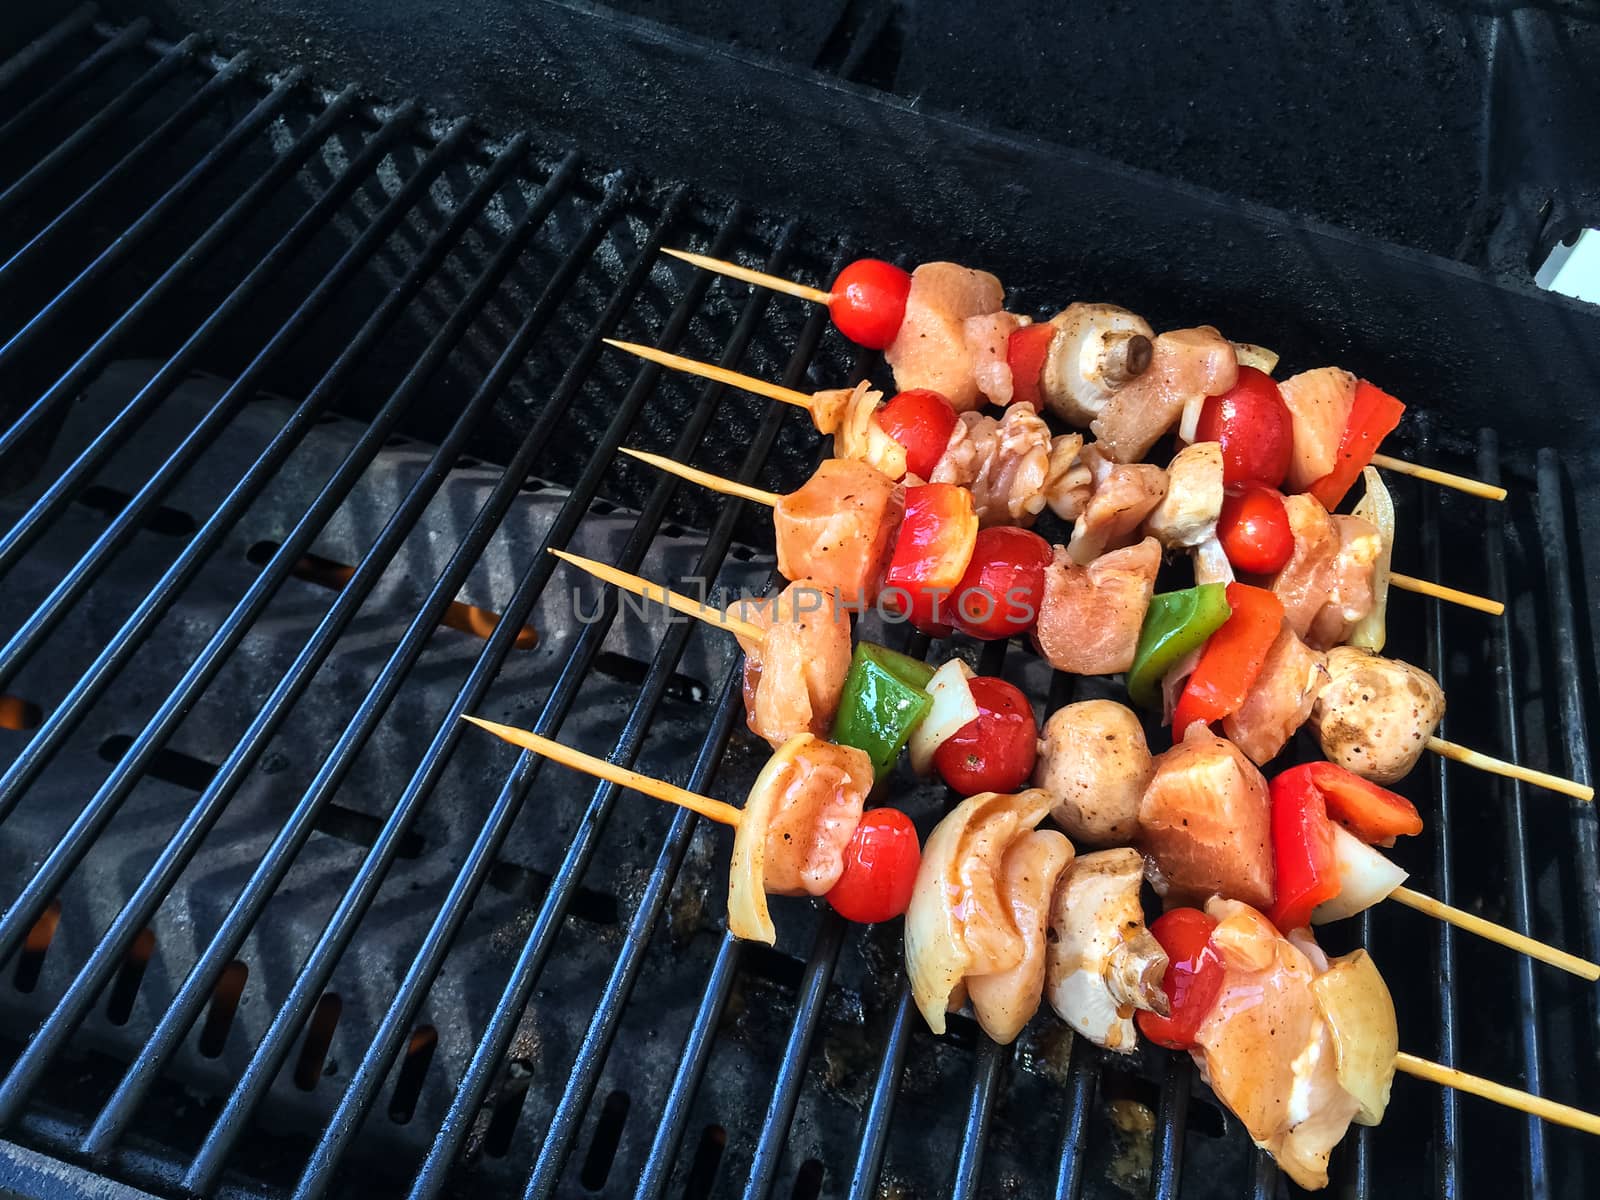 Meat and vegetable skewers ready to barbecue. Outdoor grill.